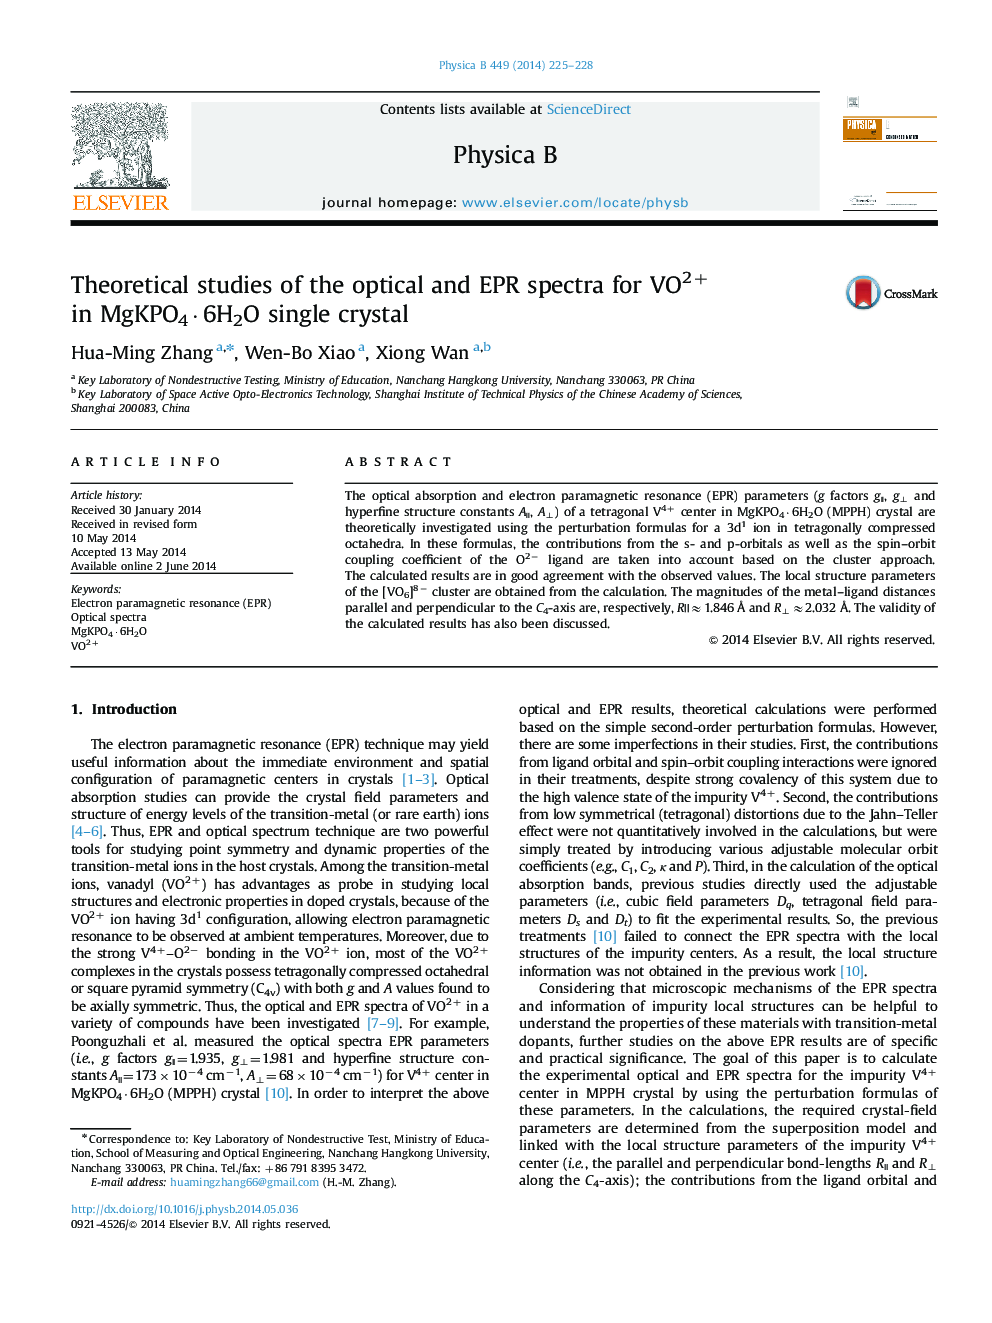 Theoretical studies of the optical and EPR spectra for VO2+ in MgKPO4·6H2O single crystal